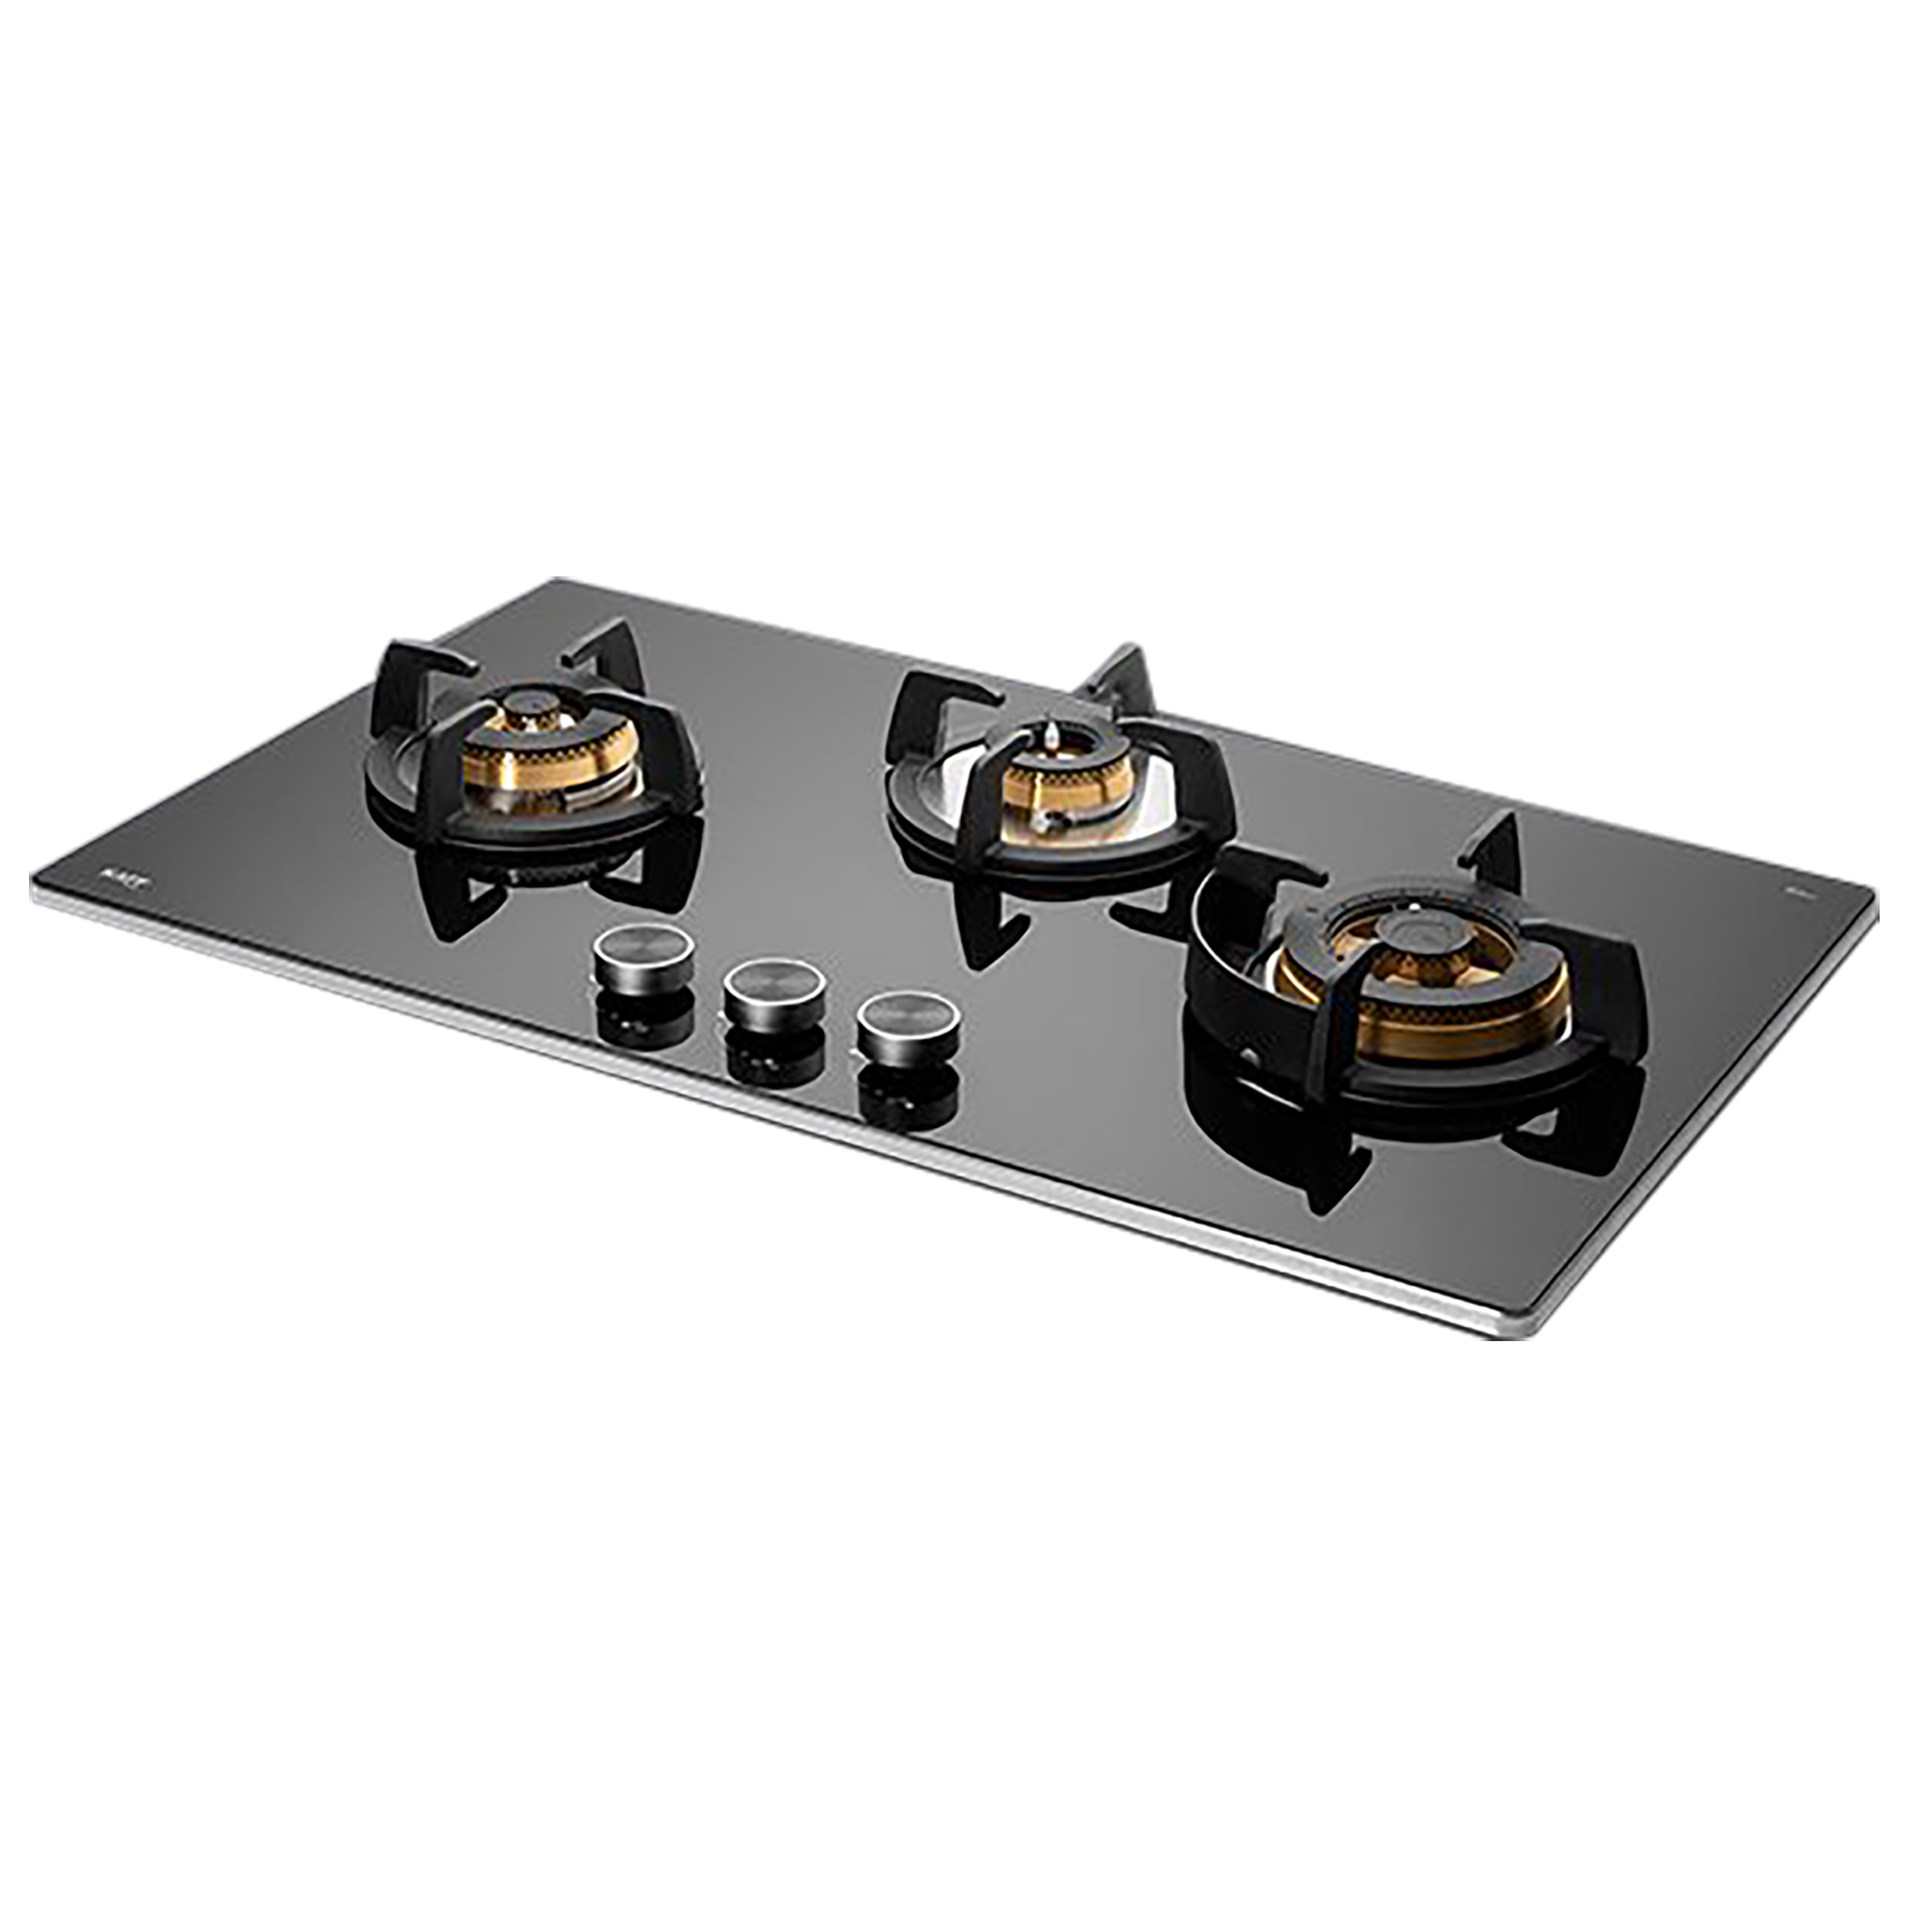 KAFF 3 Burner Thick Tempered Glass Built-in Gas Hob (Flame Failure Device, BLH-F 783, Black)_1